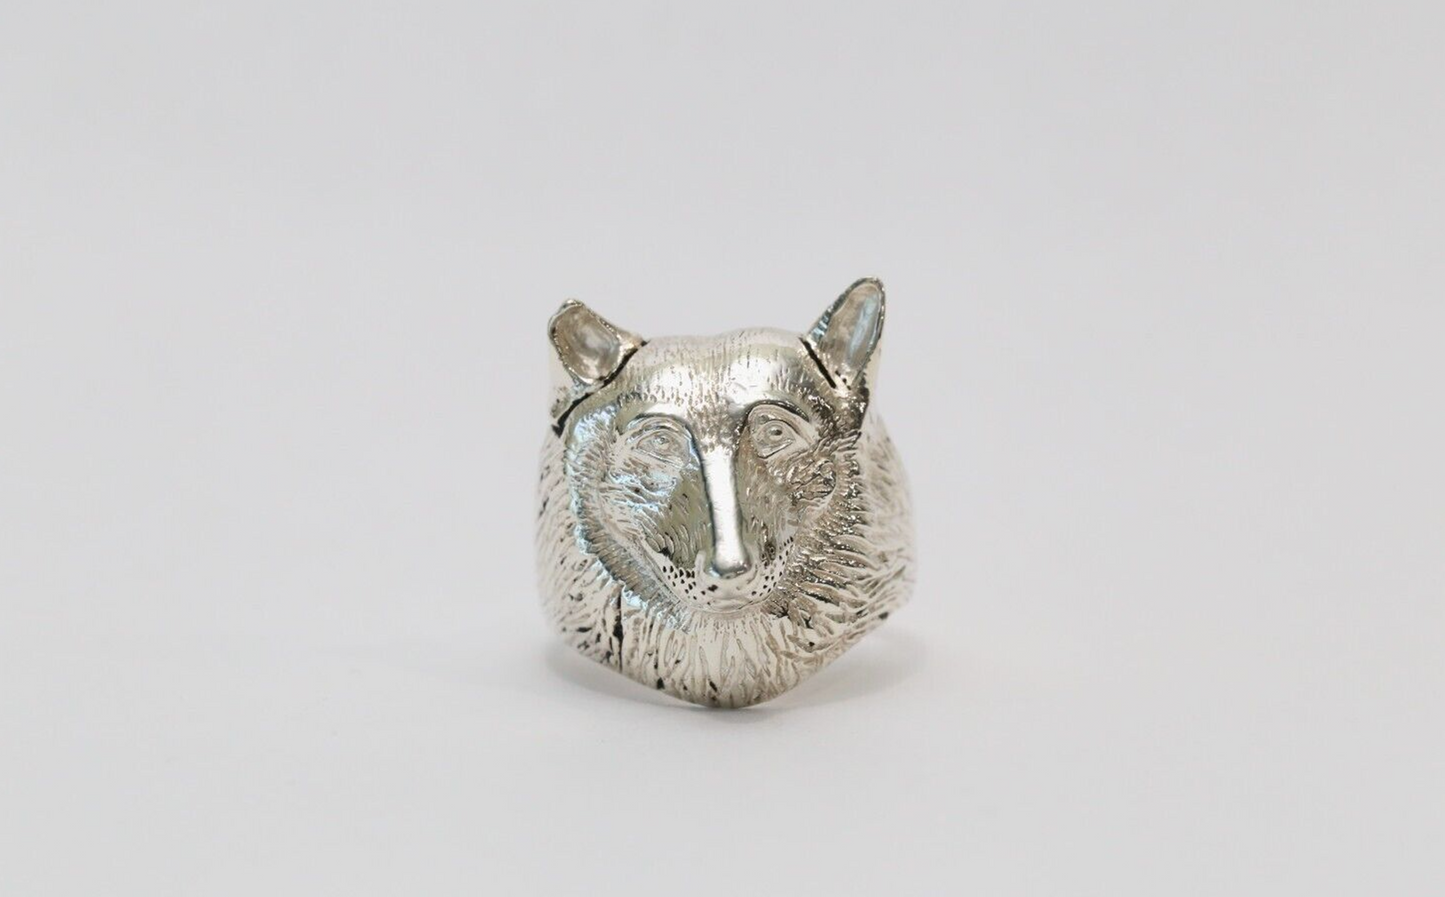 Tall Dog Sterling Silver Wolf Ring, Size 10.5 - 13.4g